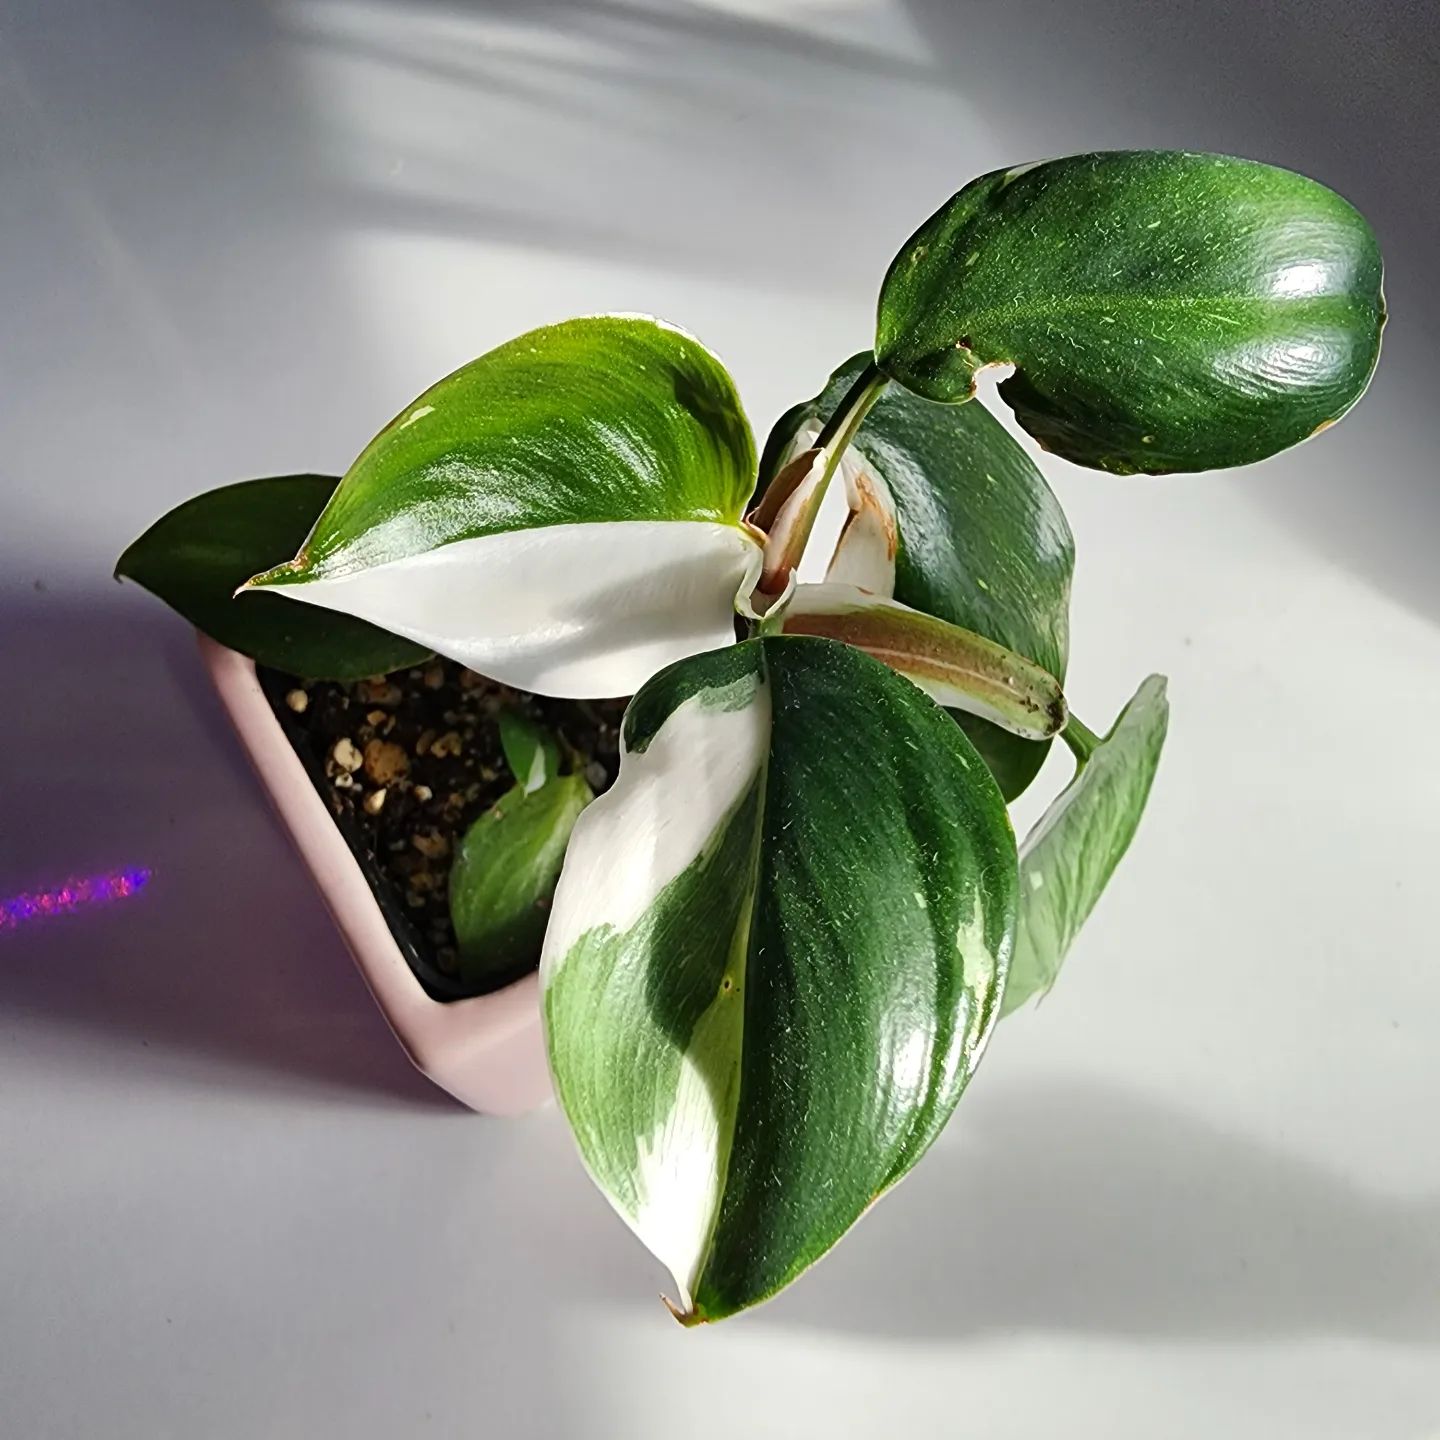 Top 5 FAQ And Answers For Green Houseplants